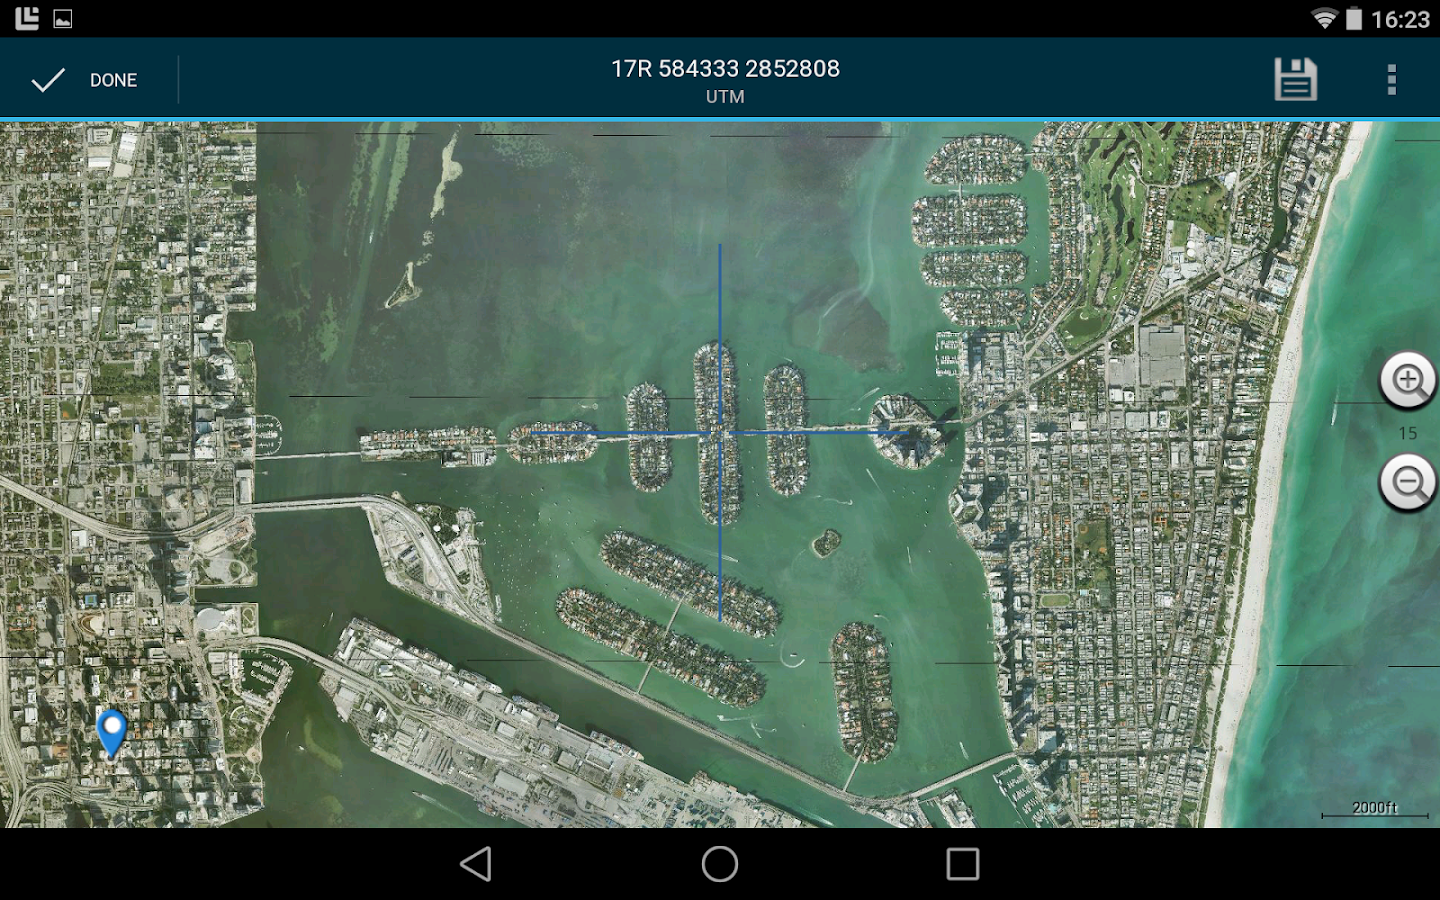 US Topo Maps Free - Android Apps on Google Play